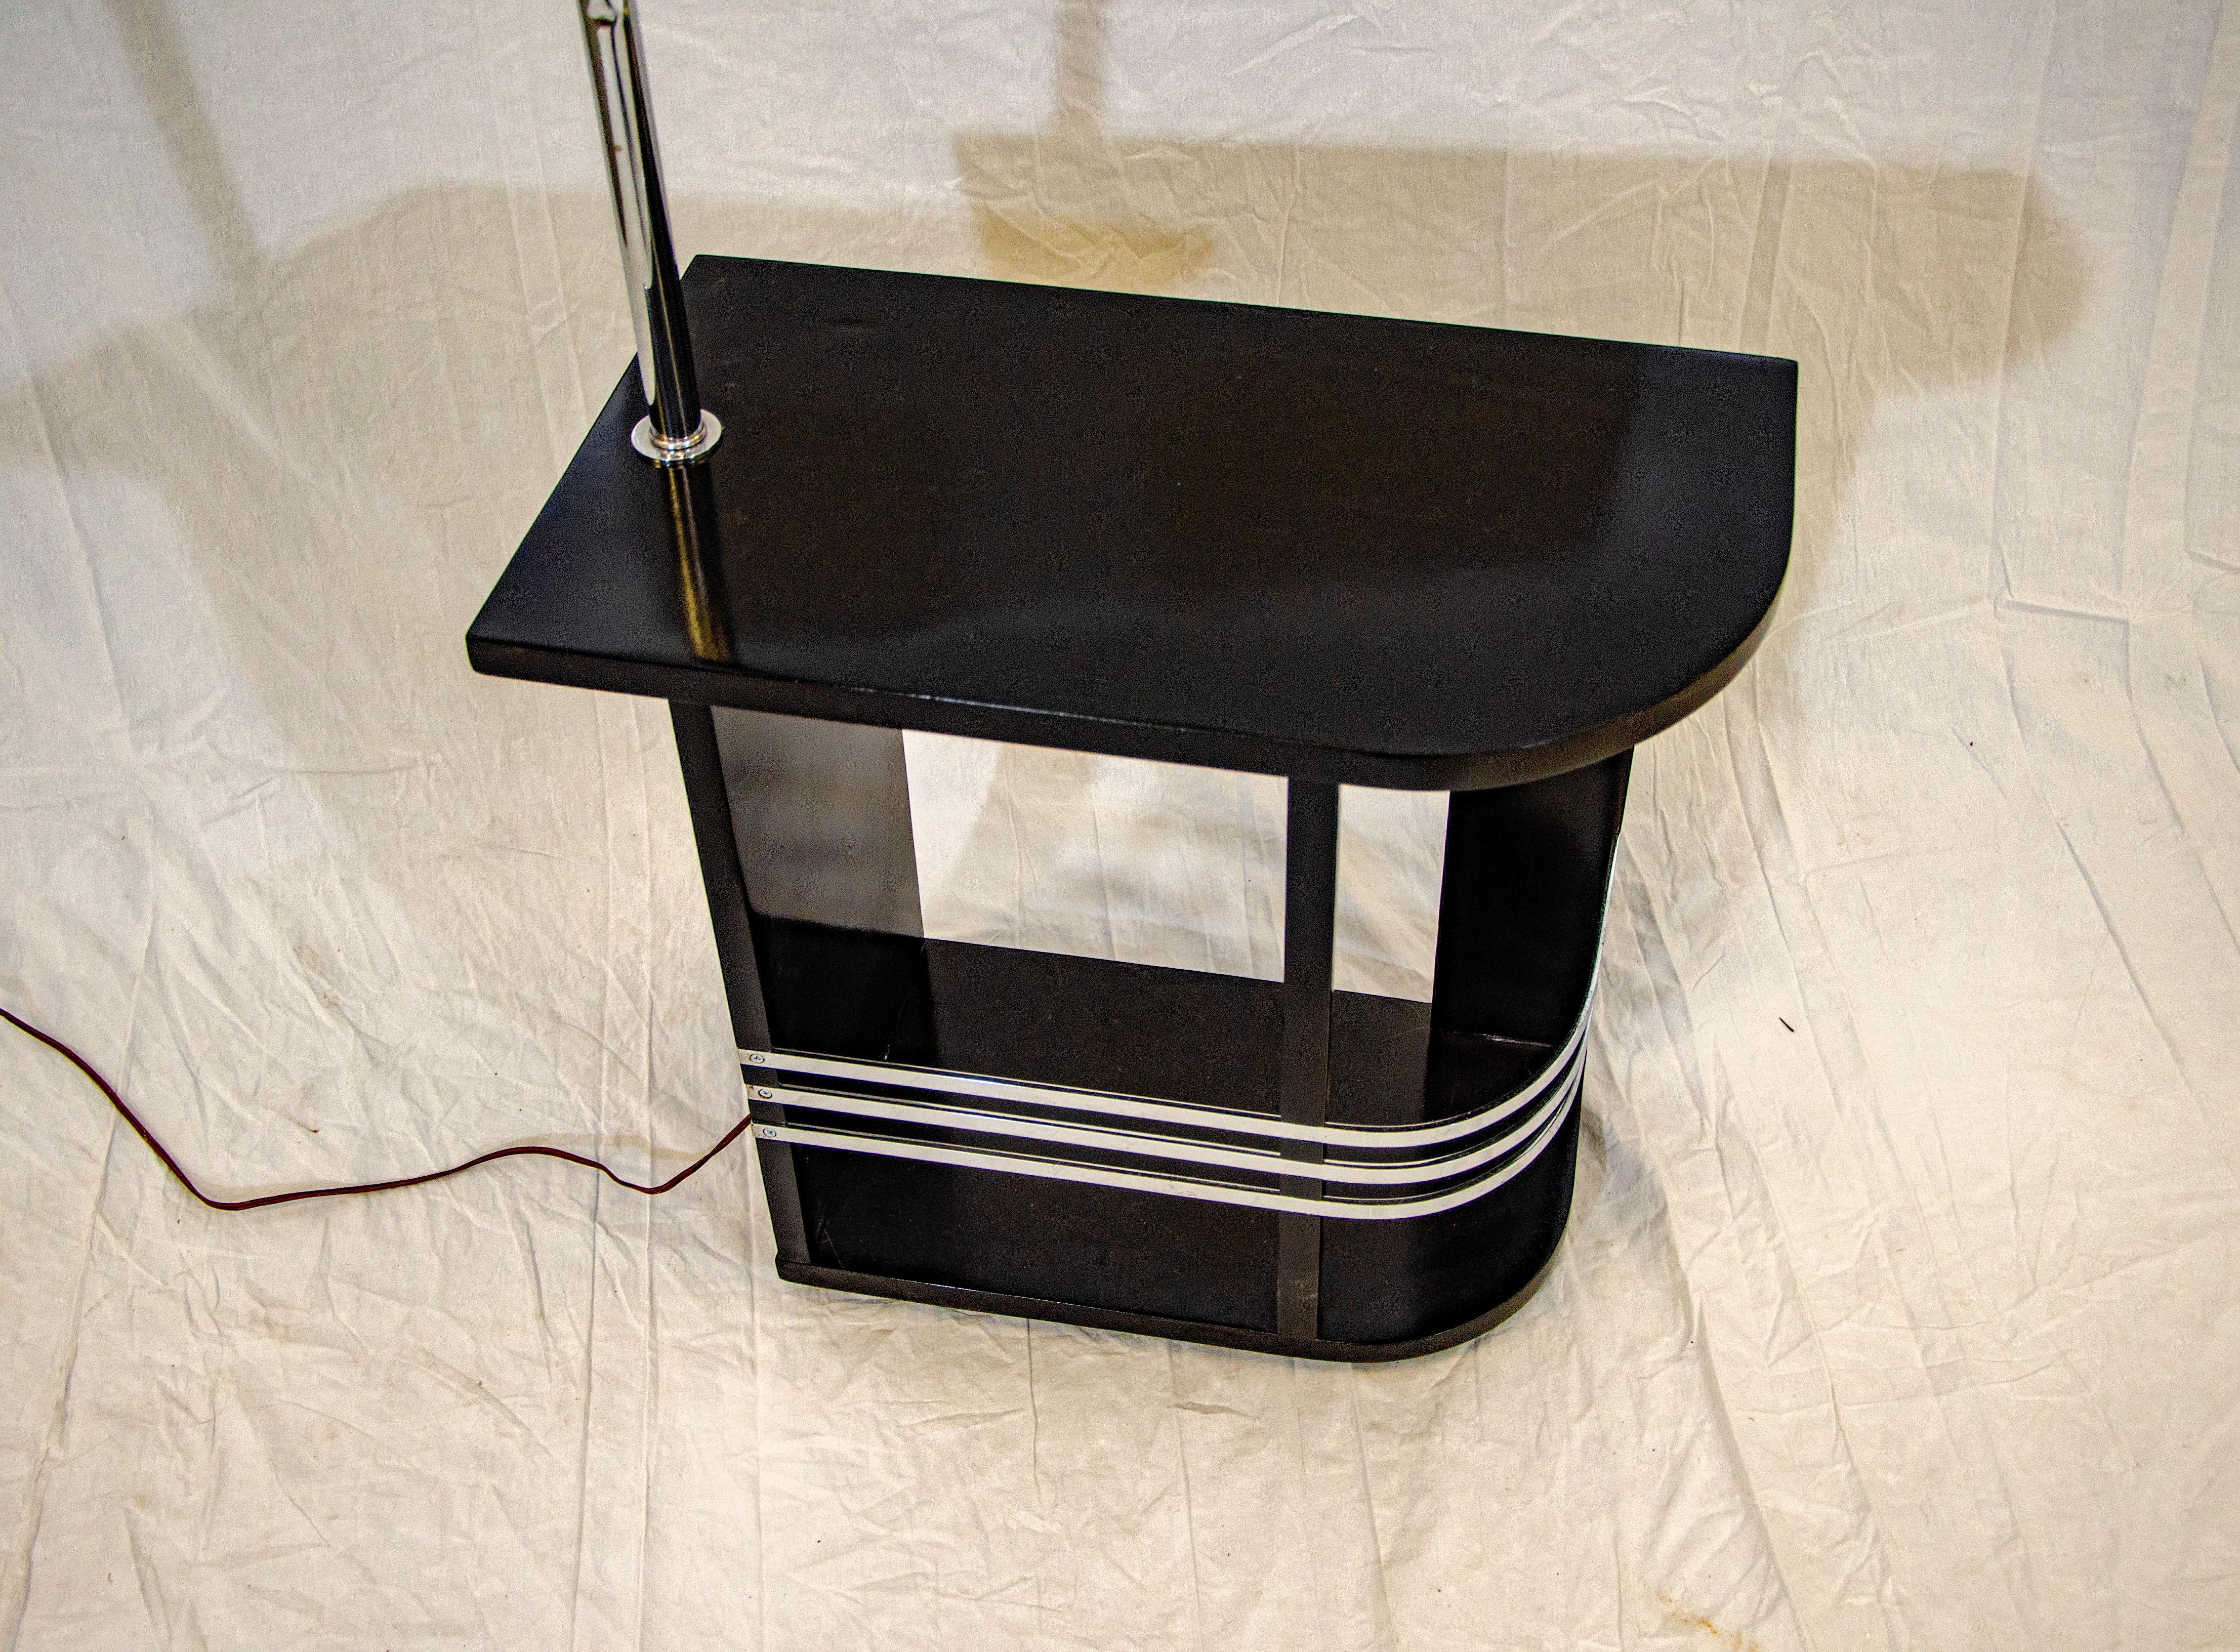 20th Century Art Deco End Table with Lamp For Sale